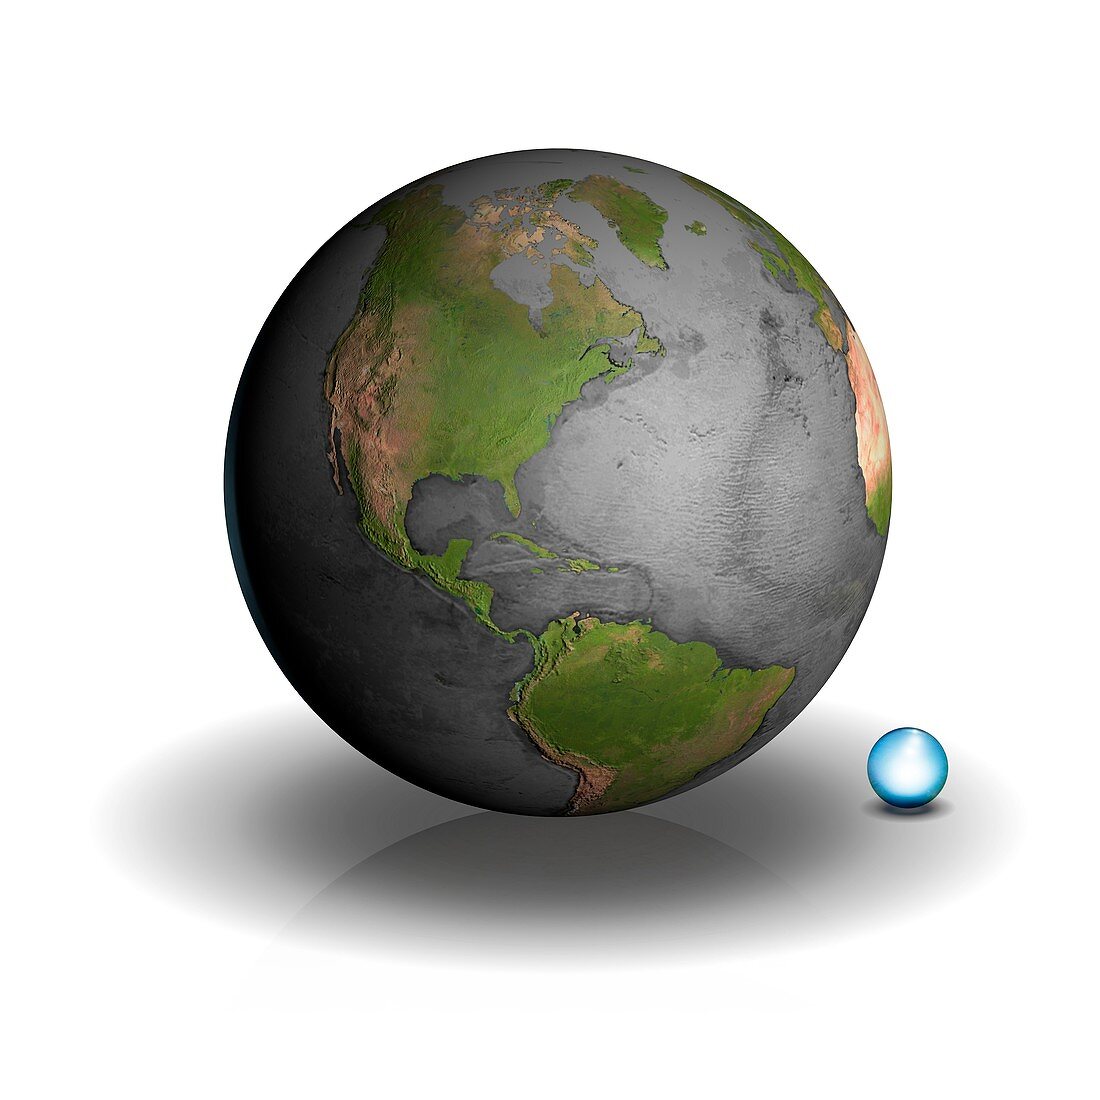 Volume of Earth's Water